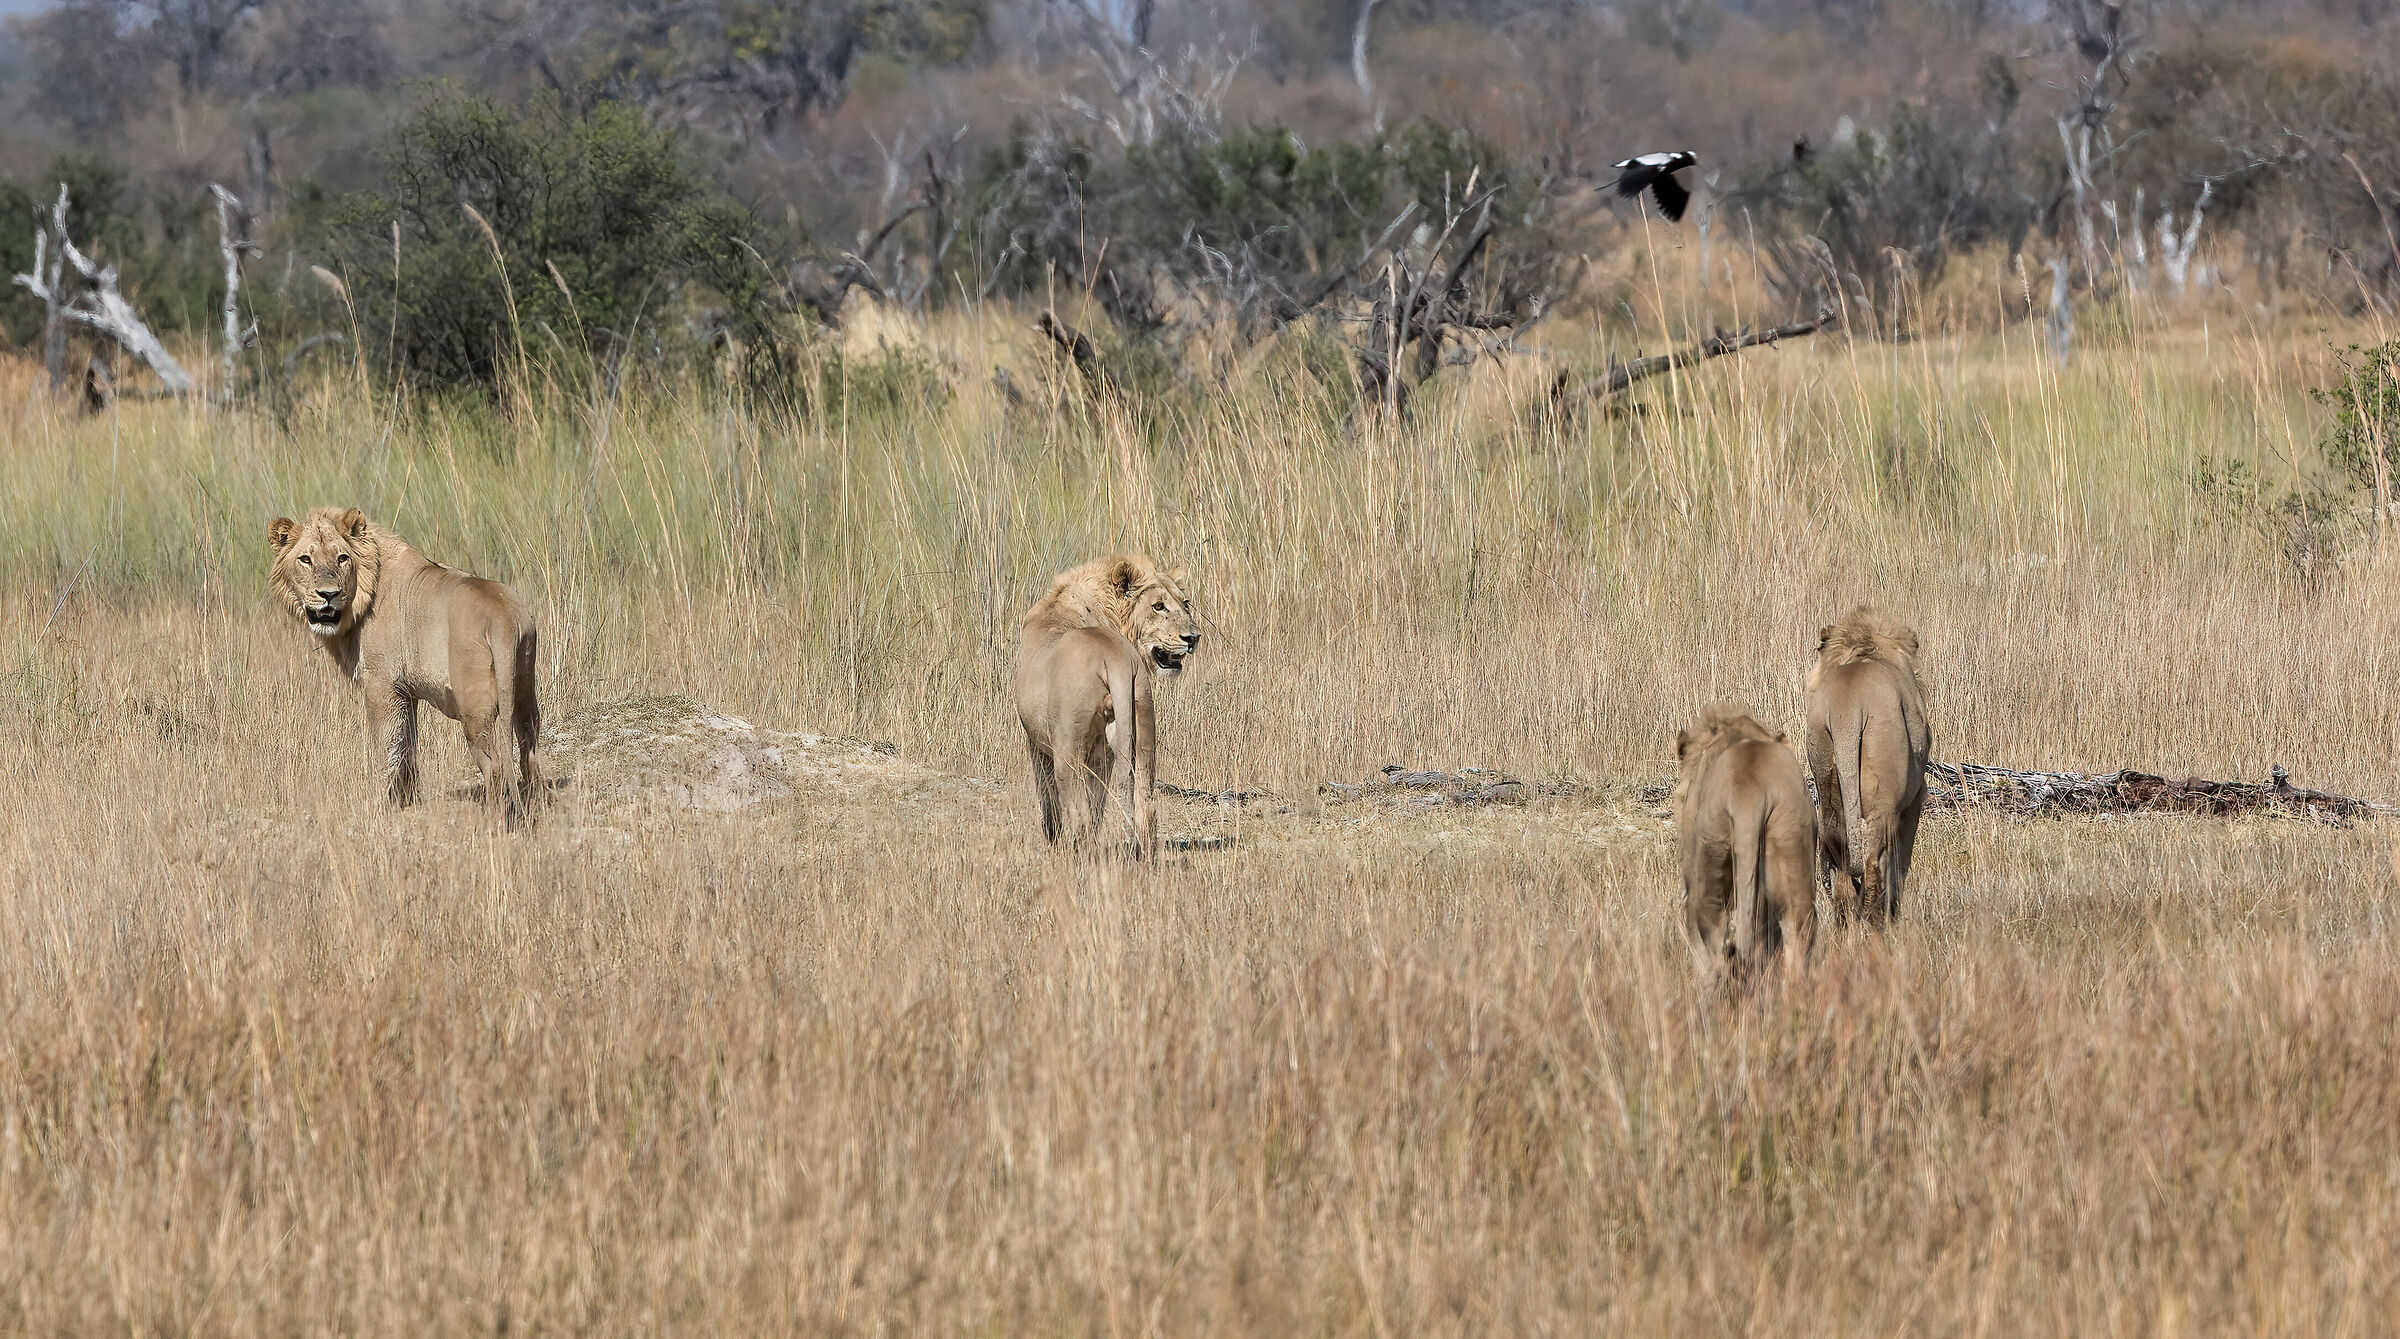 Lions defeated - Botswana, Moremi Game Reserve ...